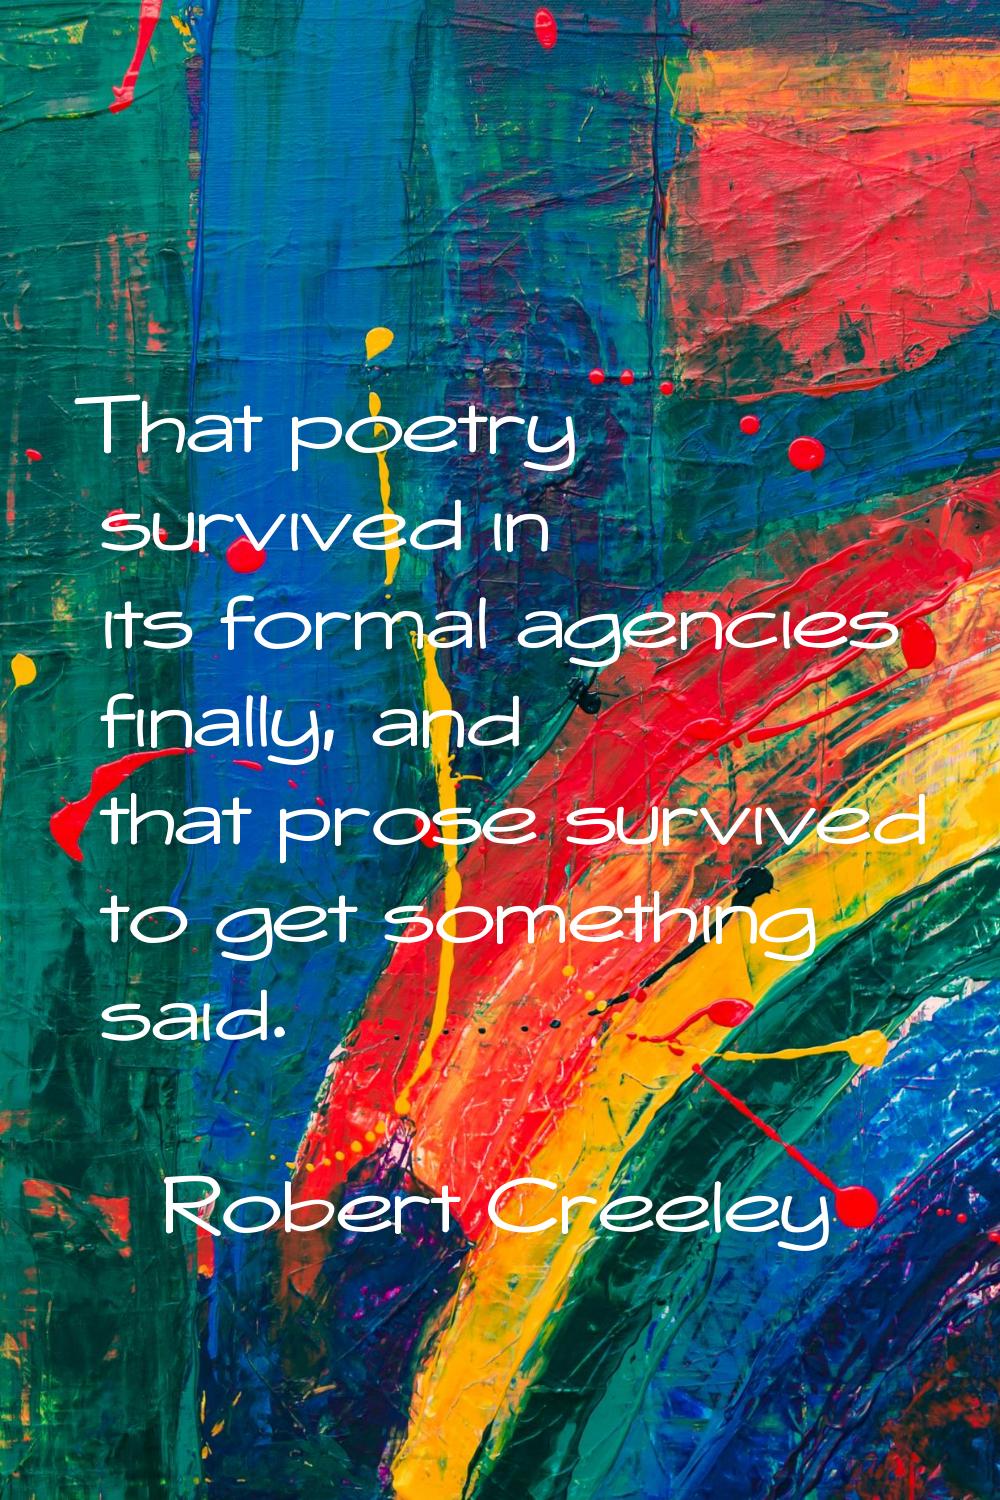 That poetry survived in its formal agencies finally, and that prose survived to get something said.